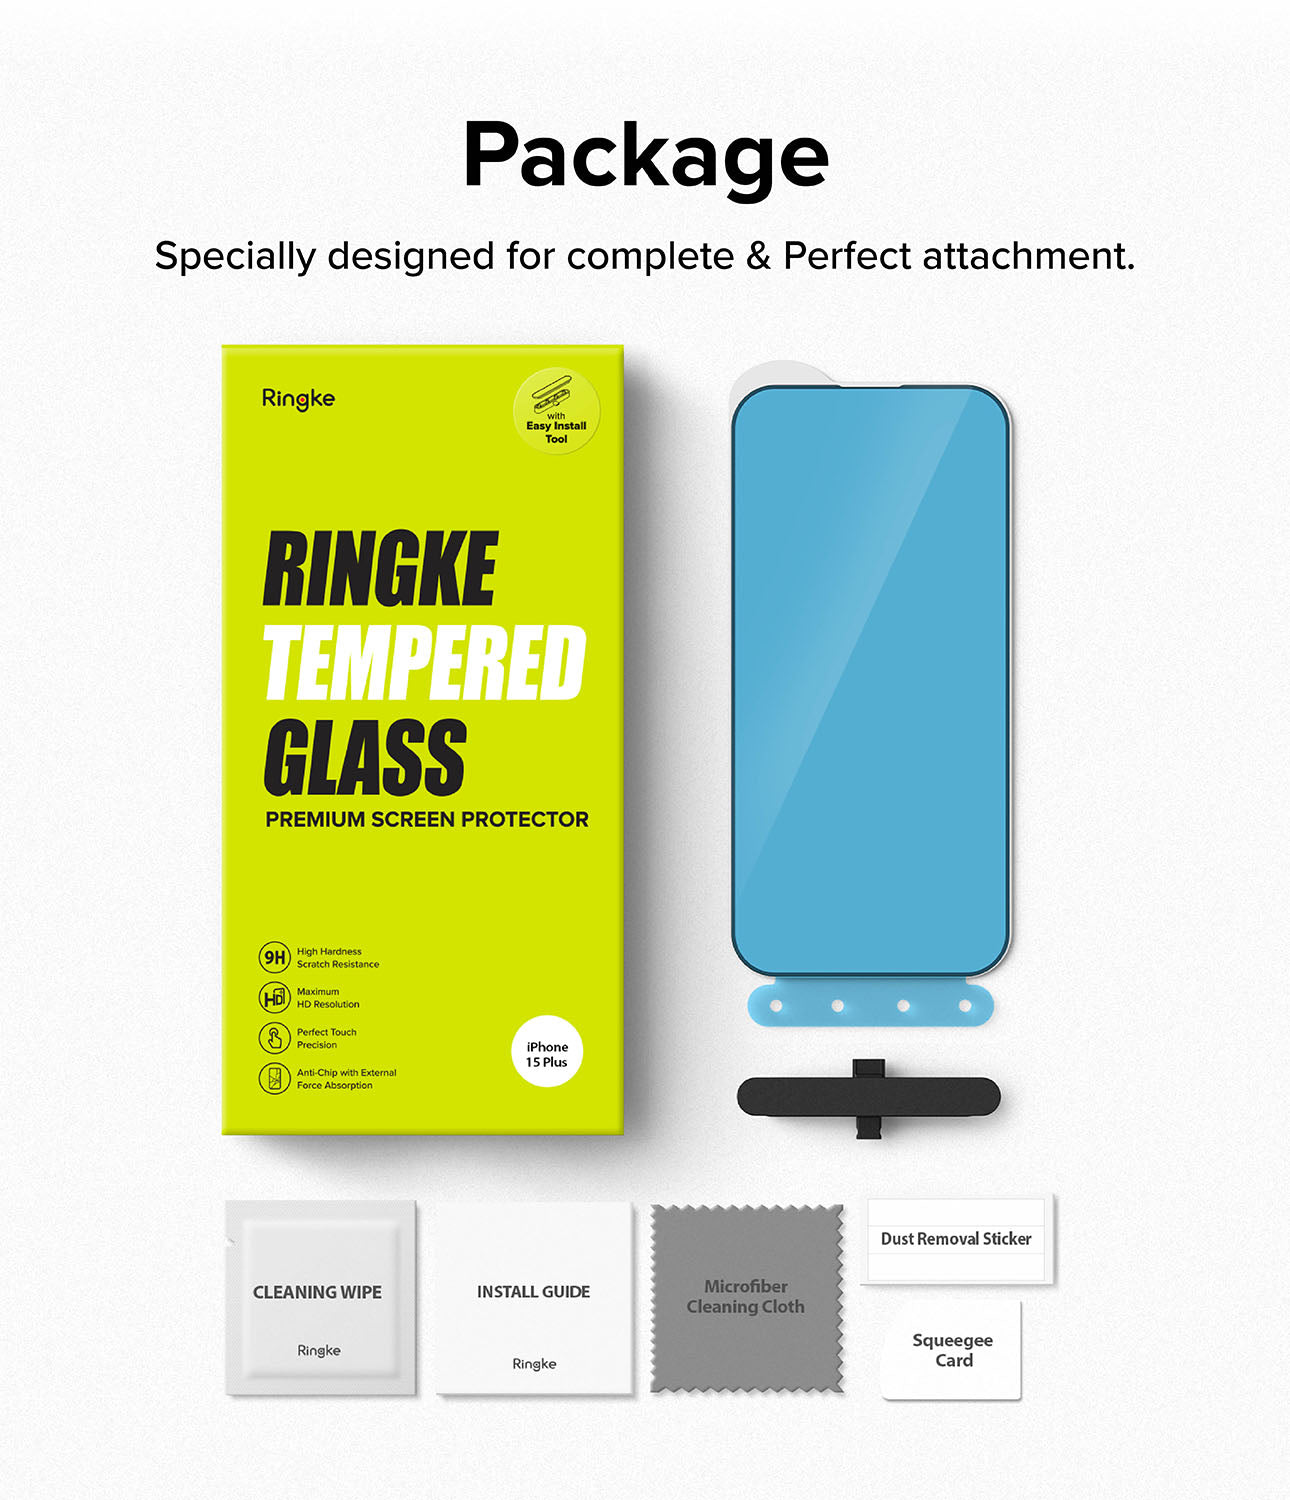 iPhone 15 Plus Screen Protector | Full Cover Glass - Package